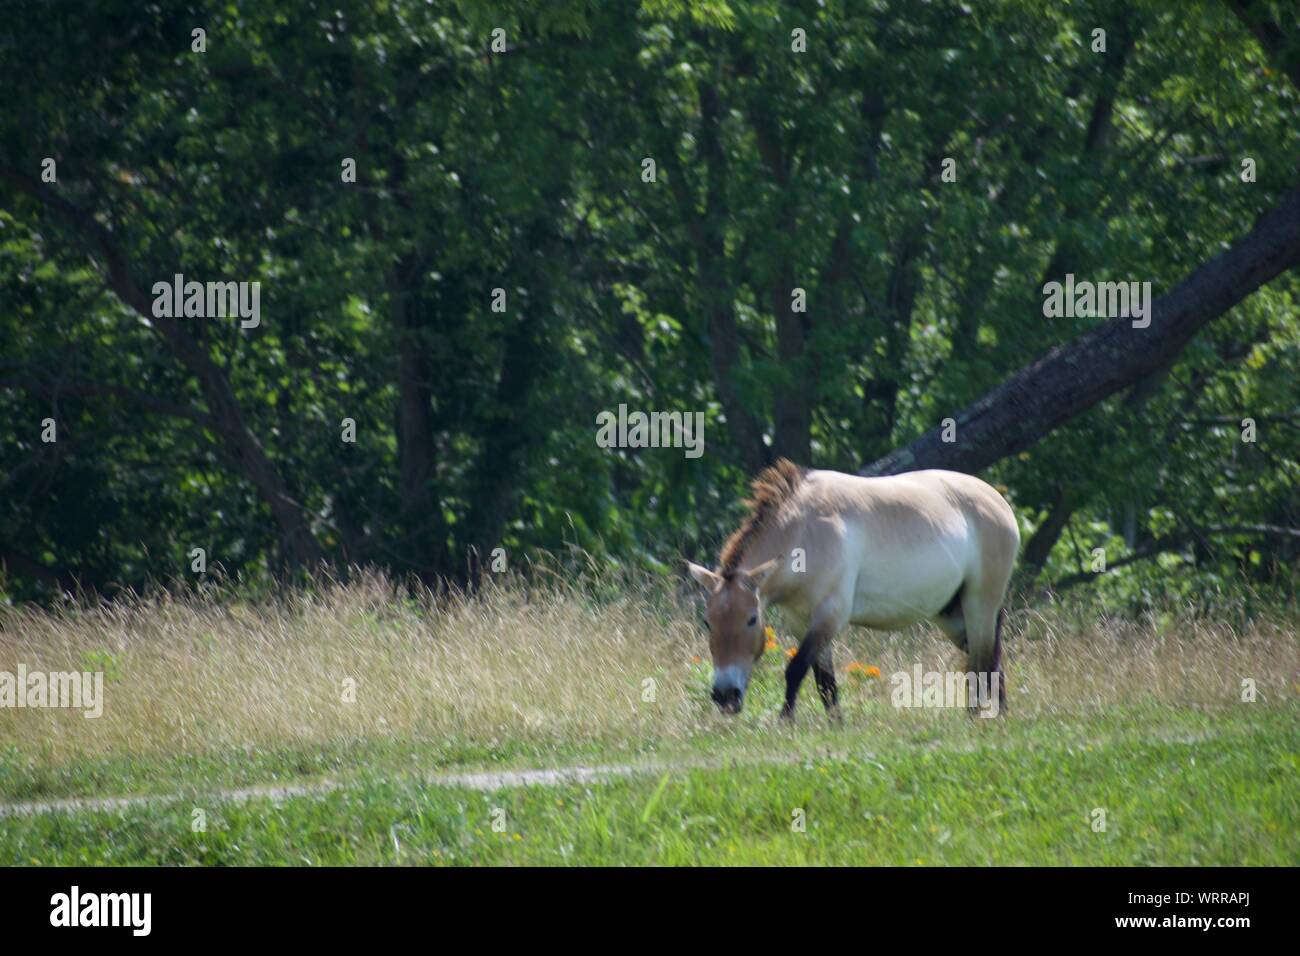 Persian Onager eating grass by a road with trees behind Stock Photo